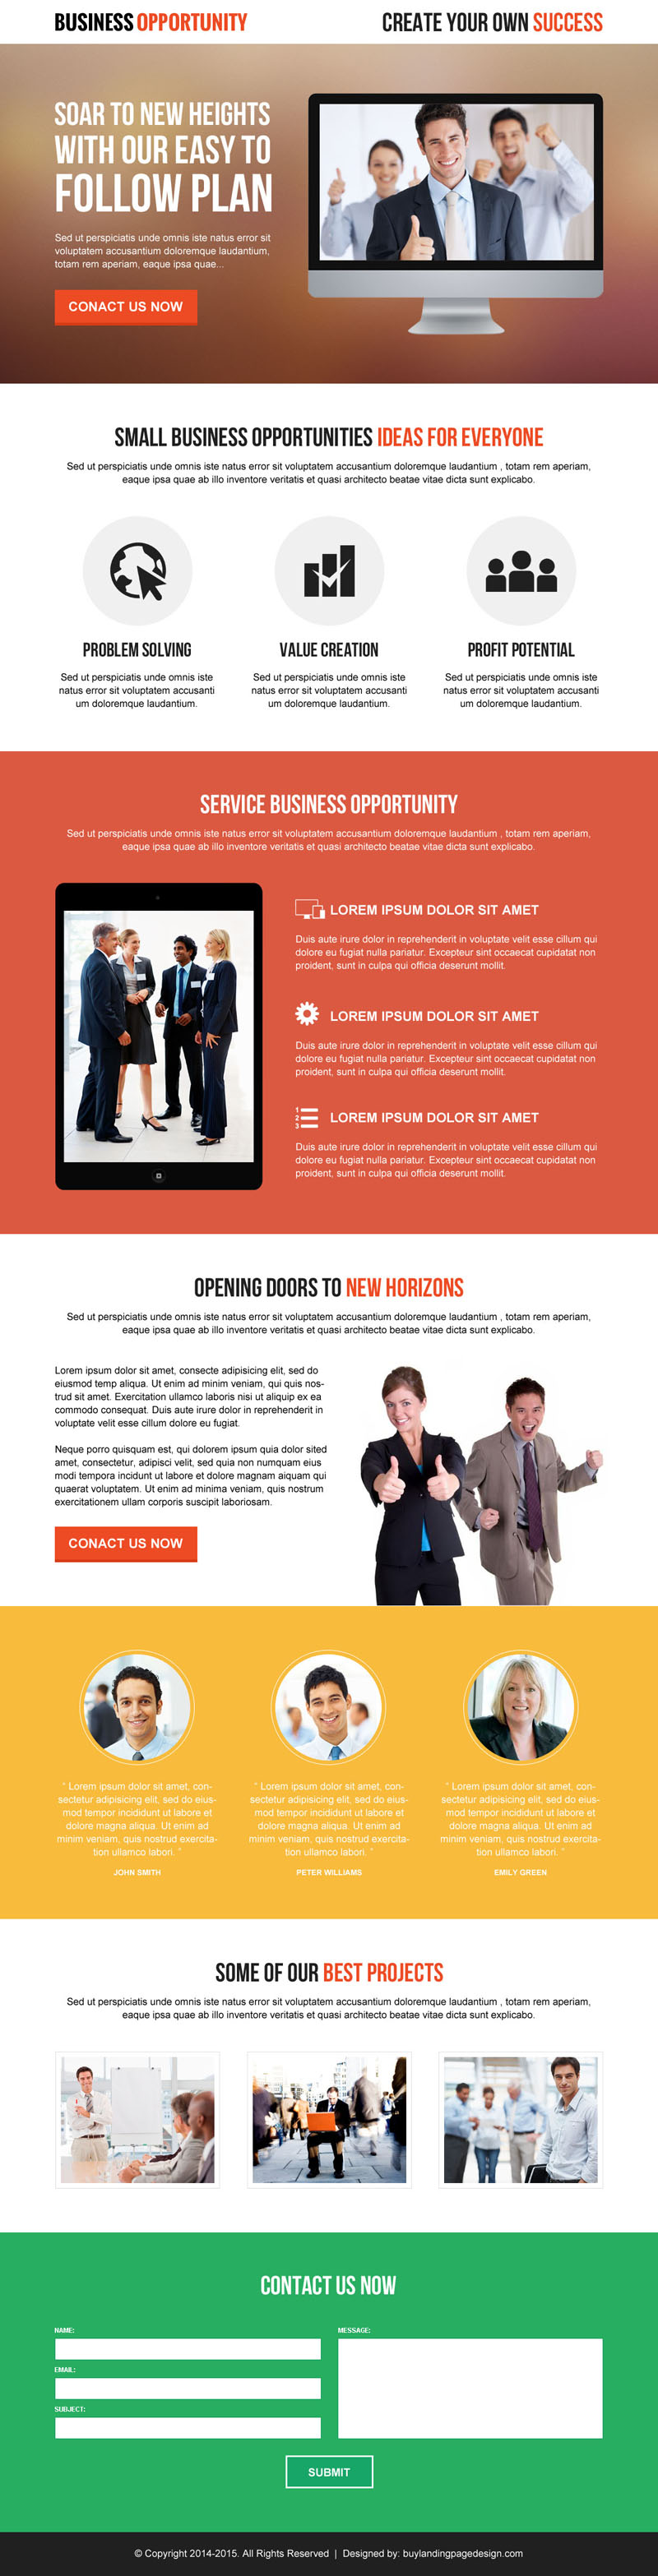 professional-business-solutions-cta-responsive-landing-page-design-templates-to-boost-your-business-005